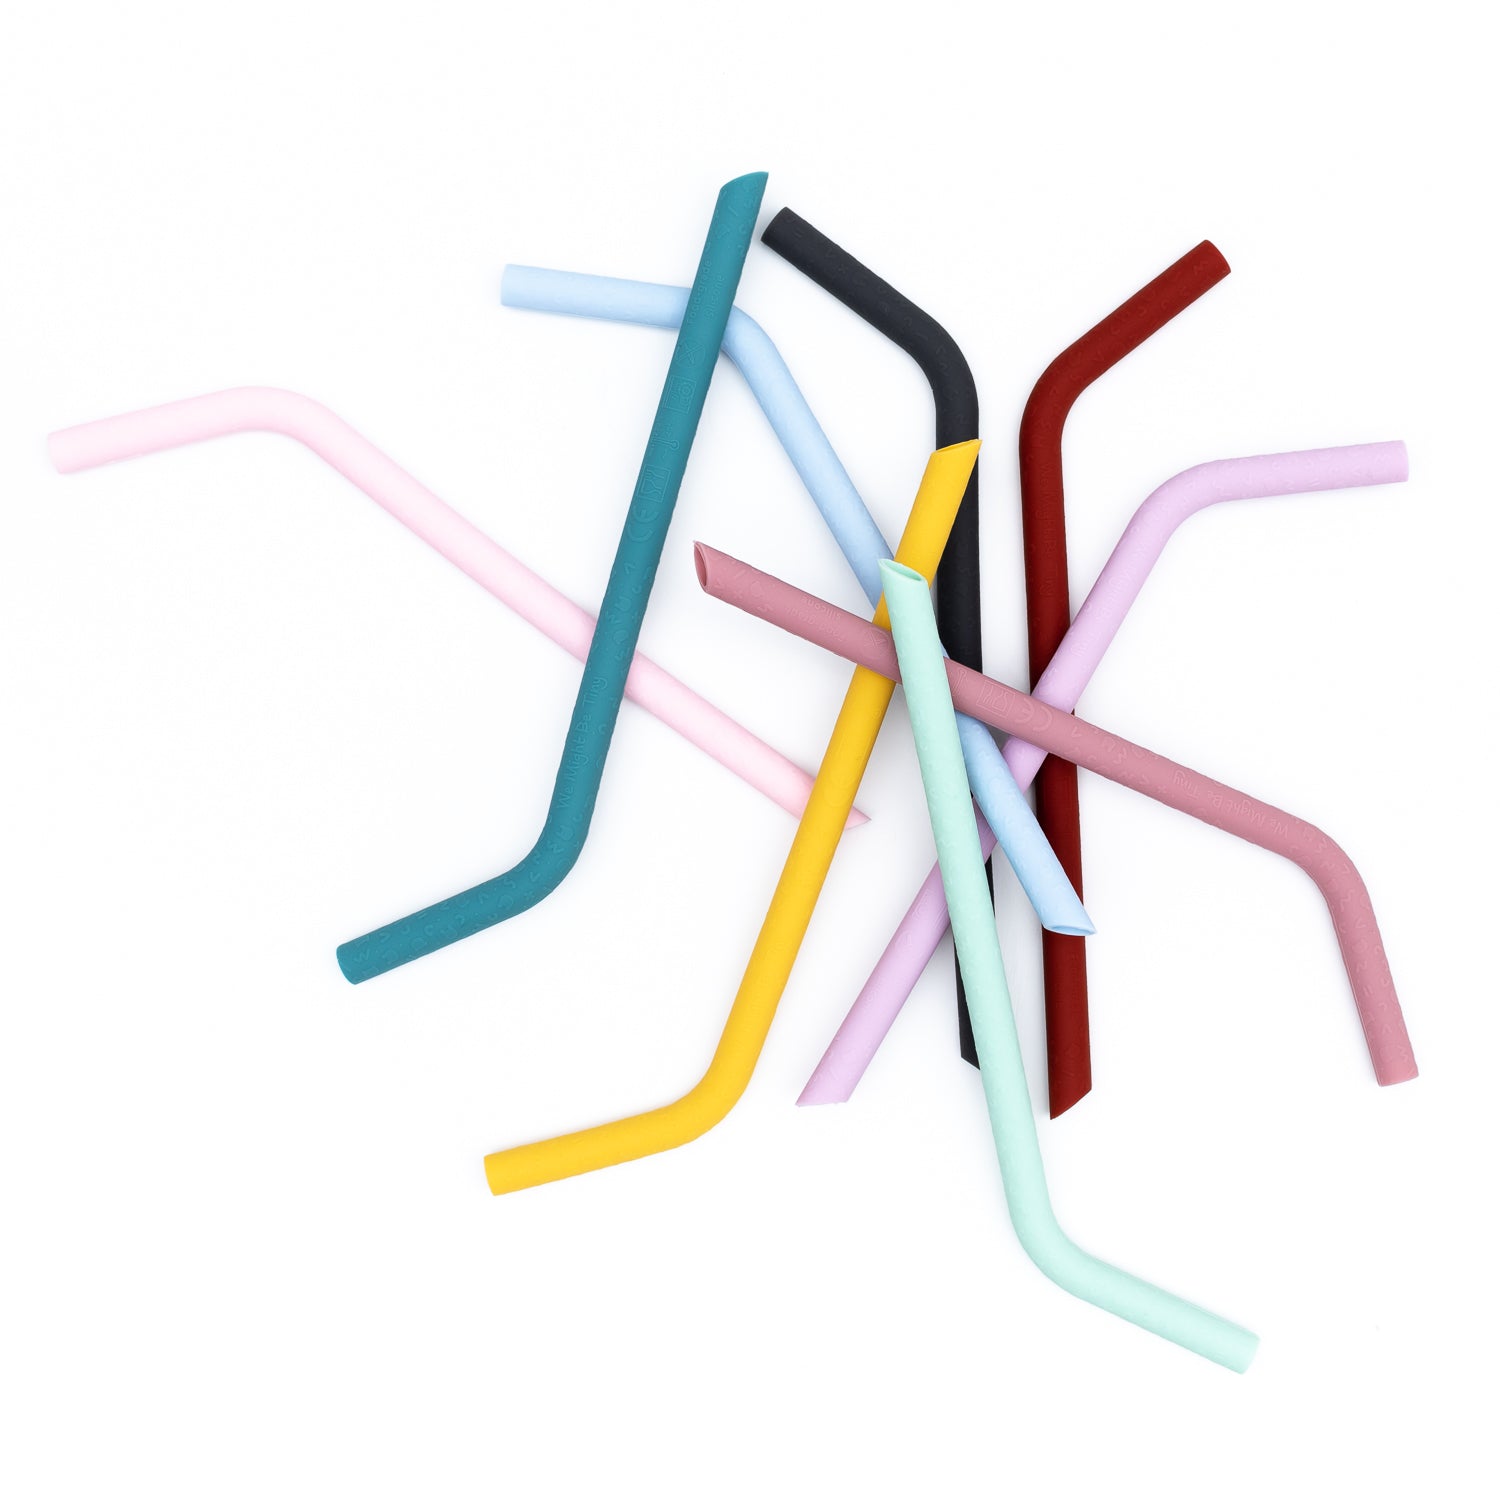 All colours of silicone straws